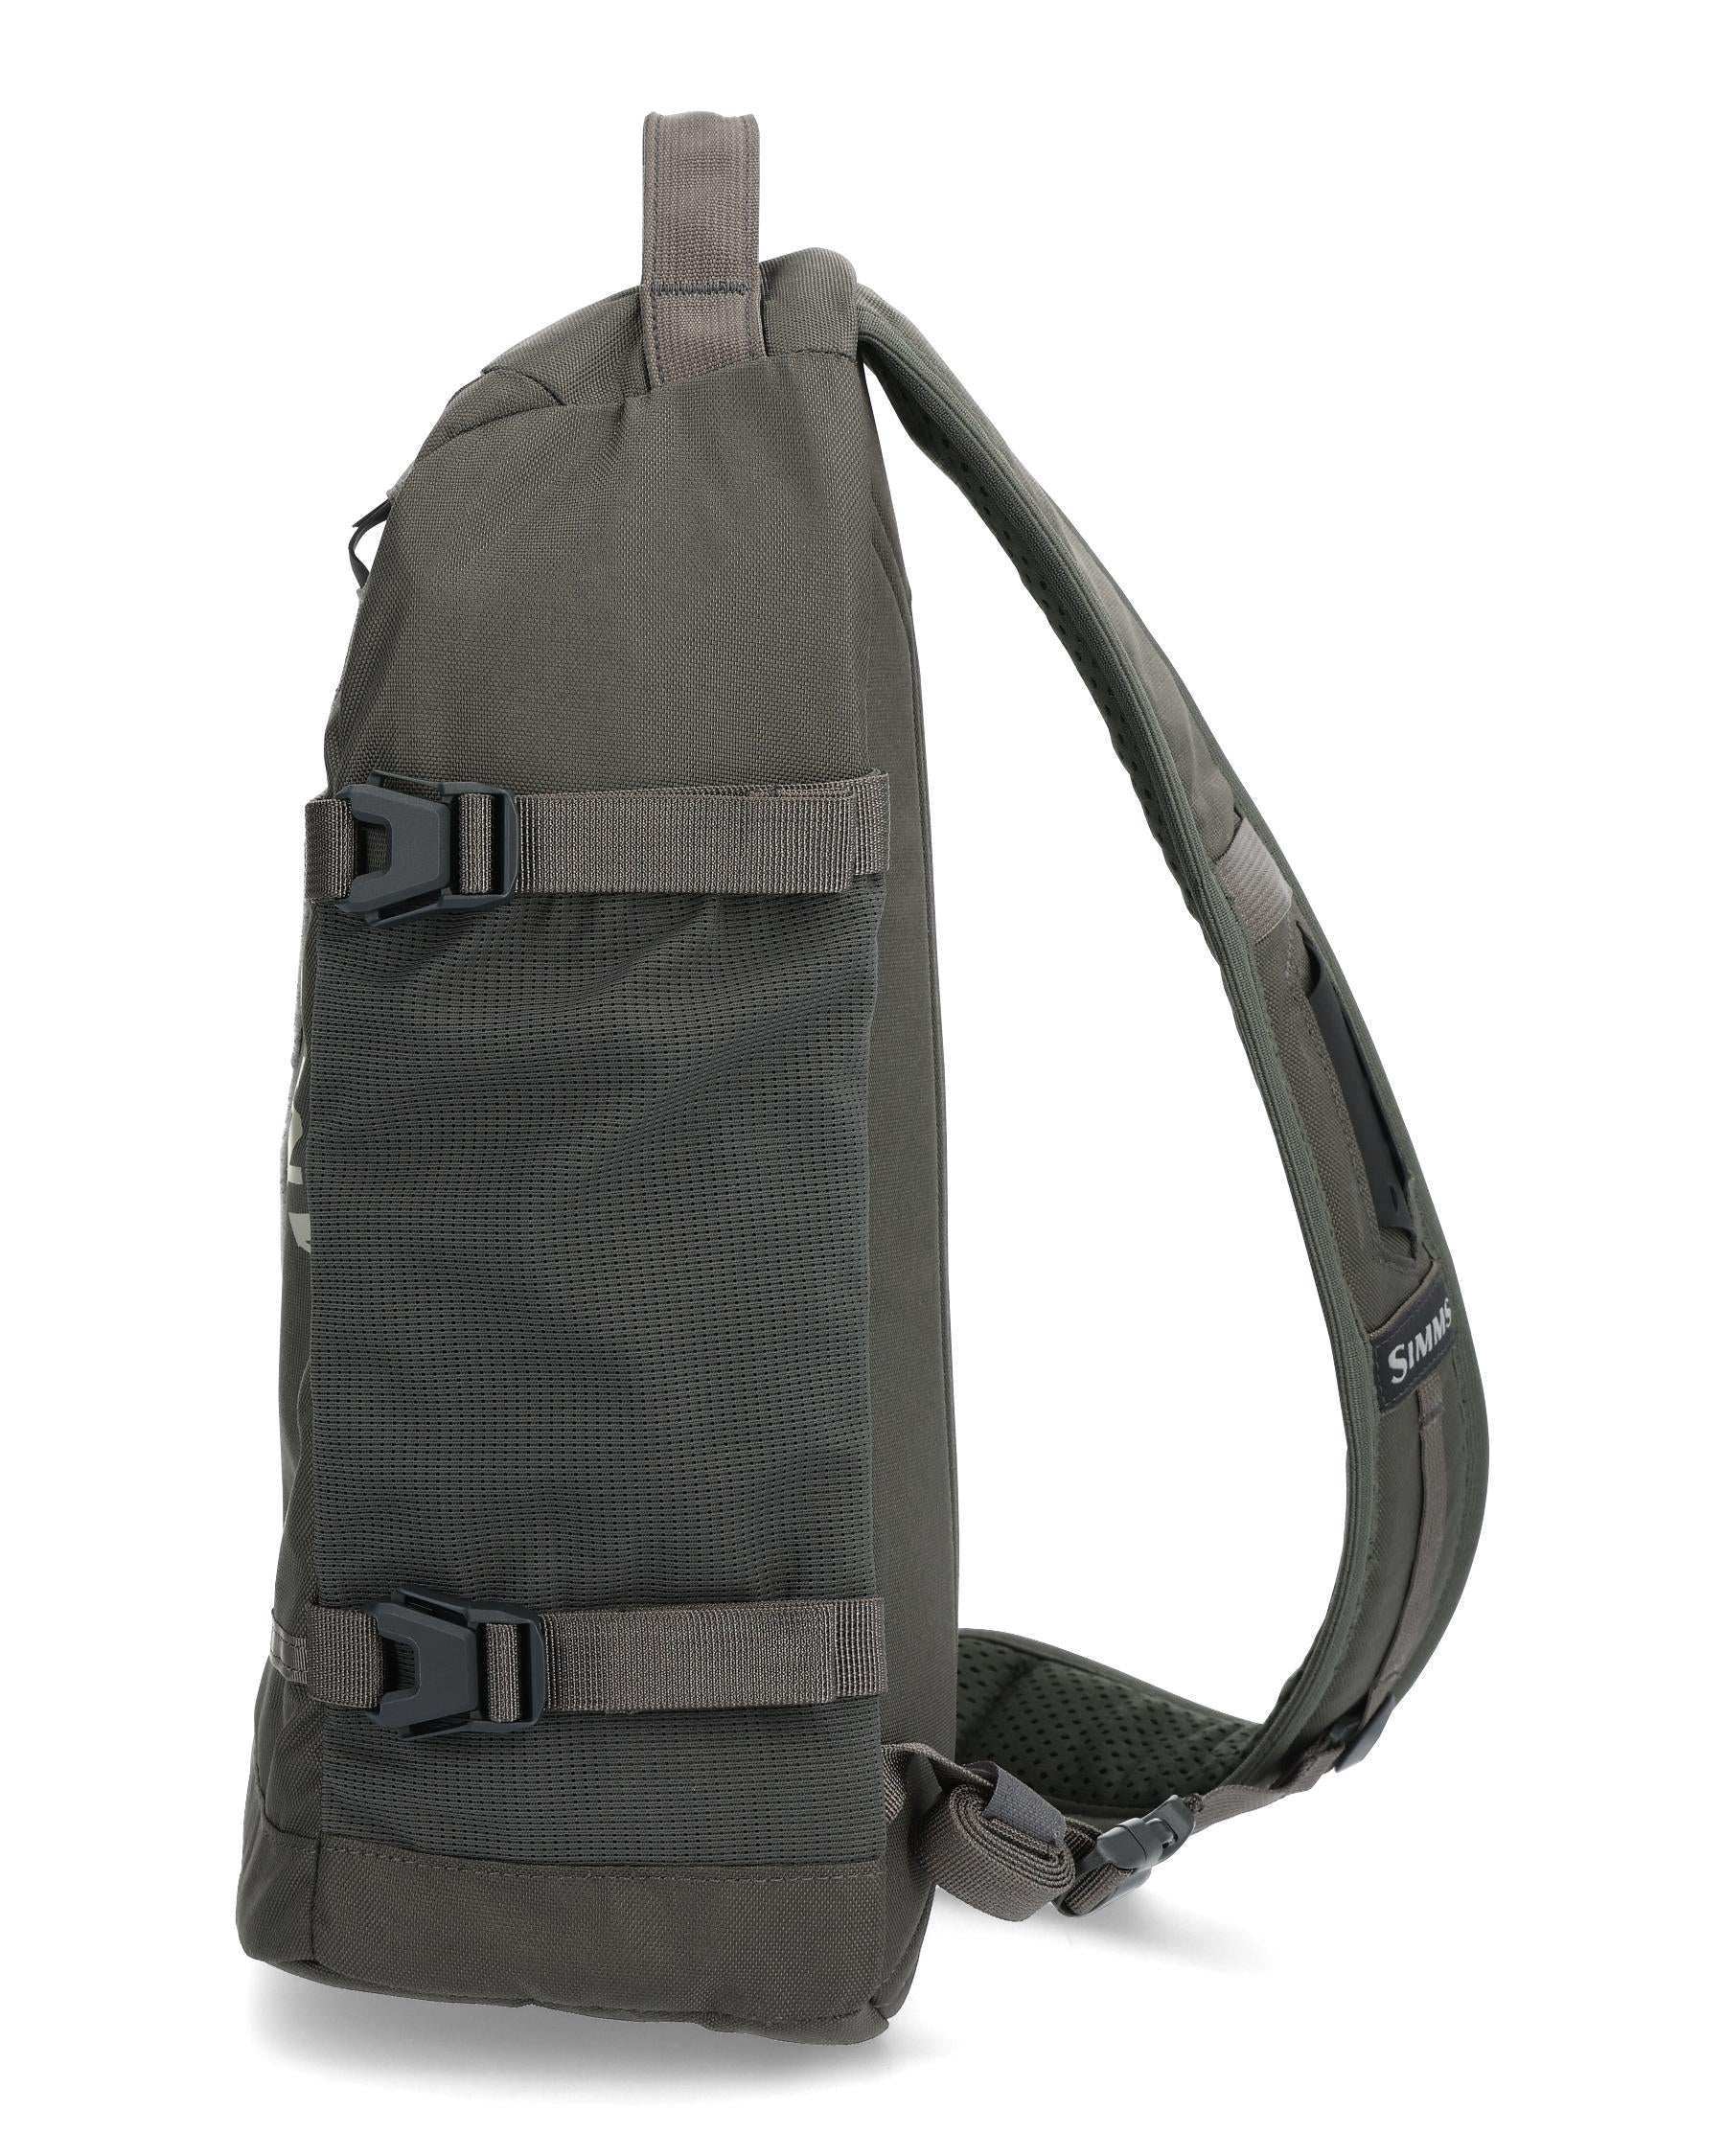 Tributary Sling Pack | Simms Fishing Products